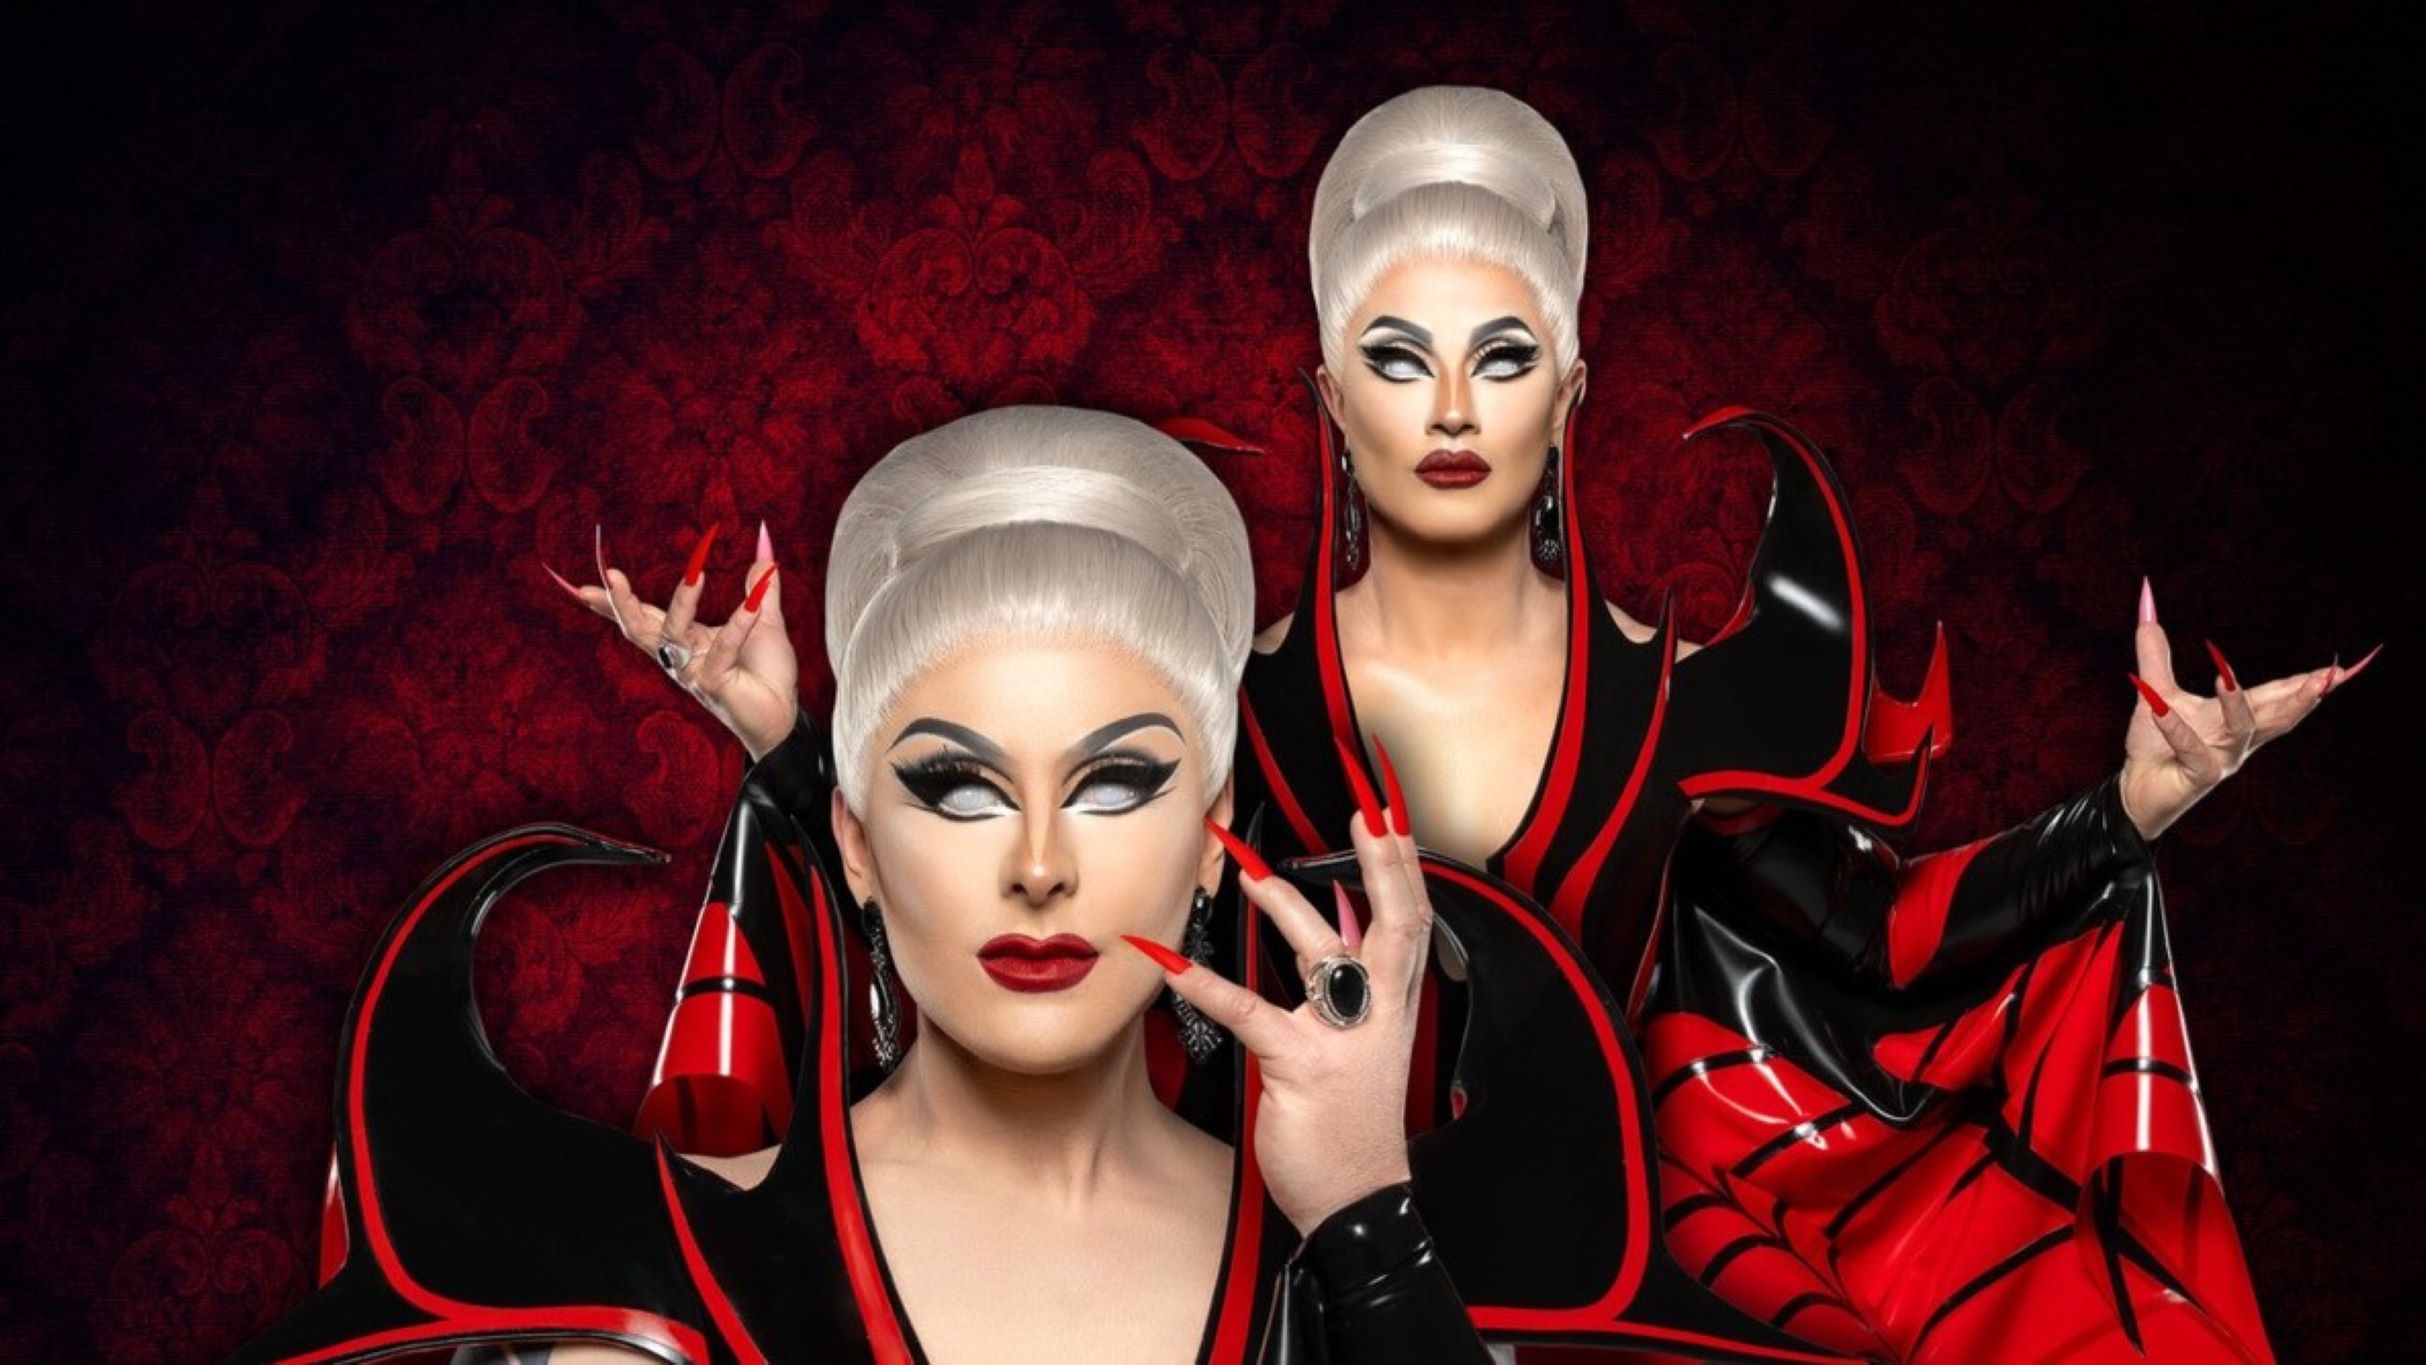 The Boulet Brothers Dragula: Season 5 Tour presale password for real tickets in Dallas